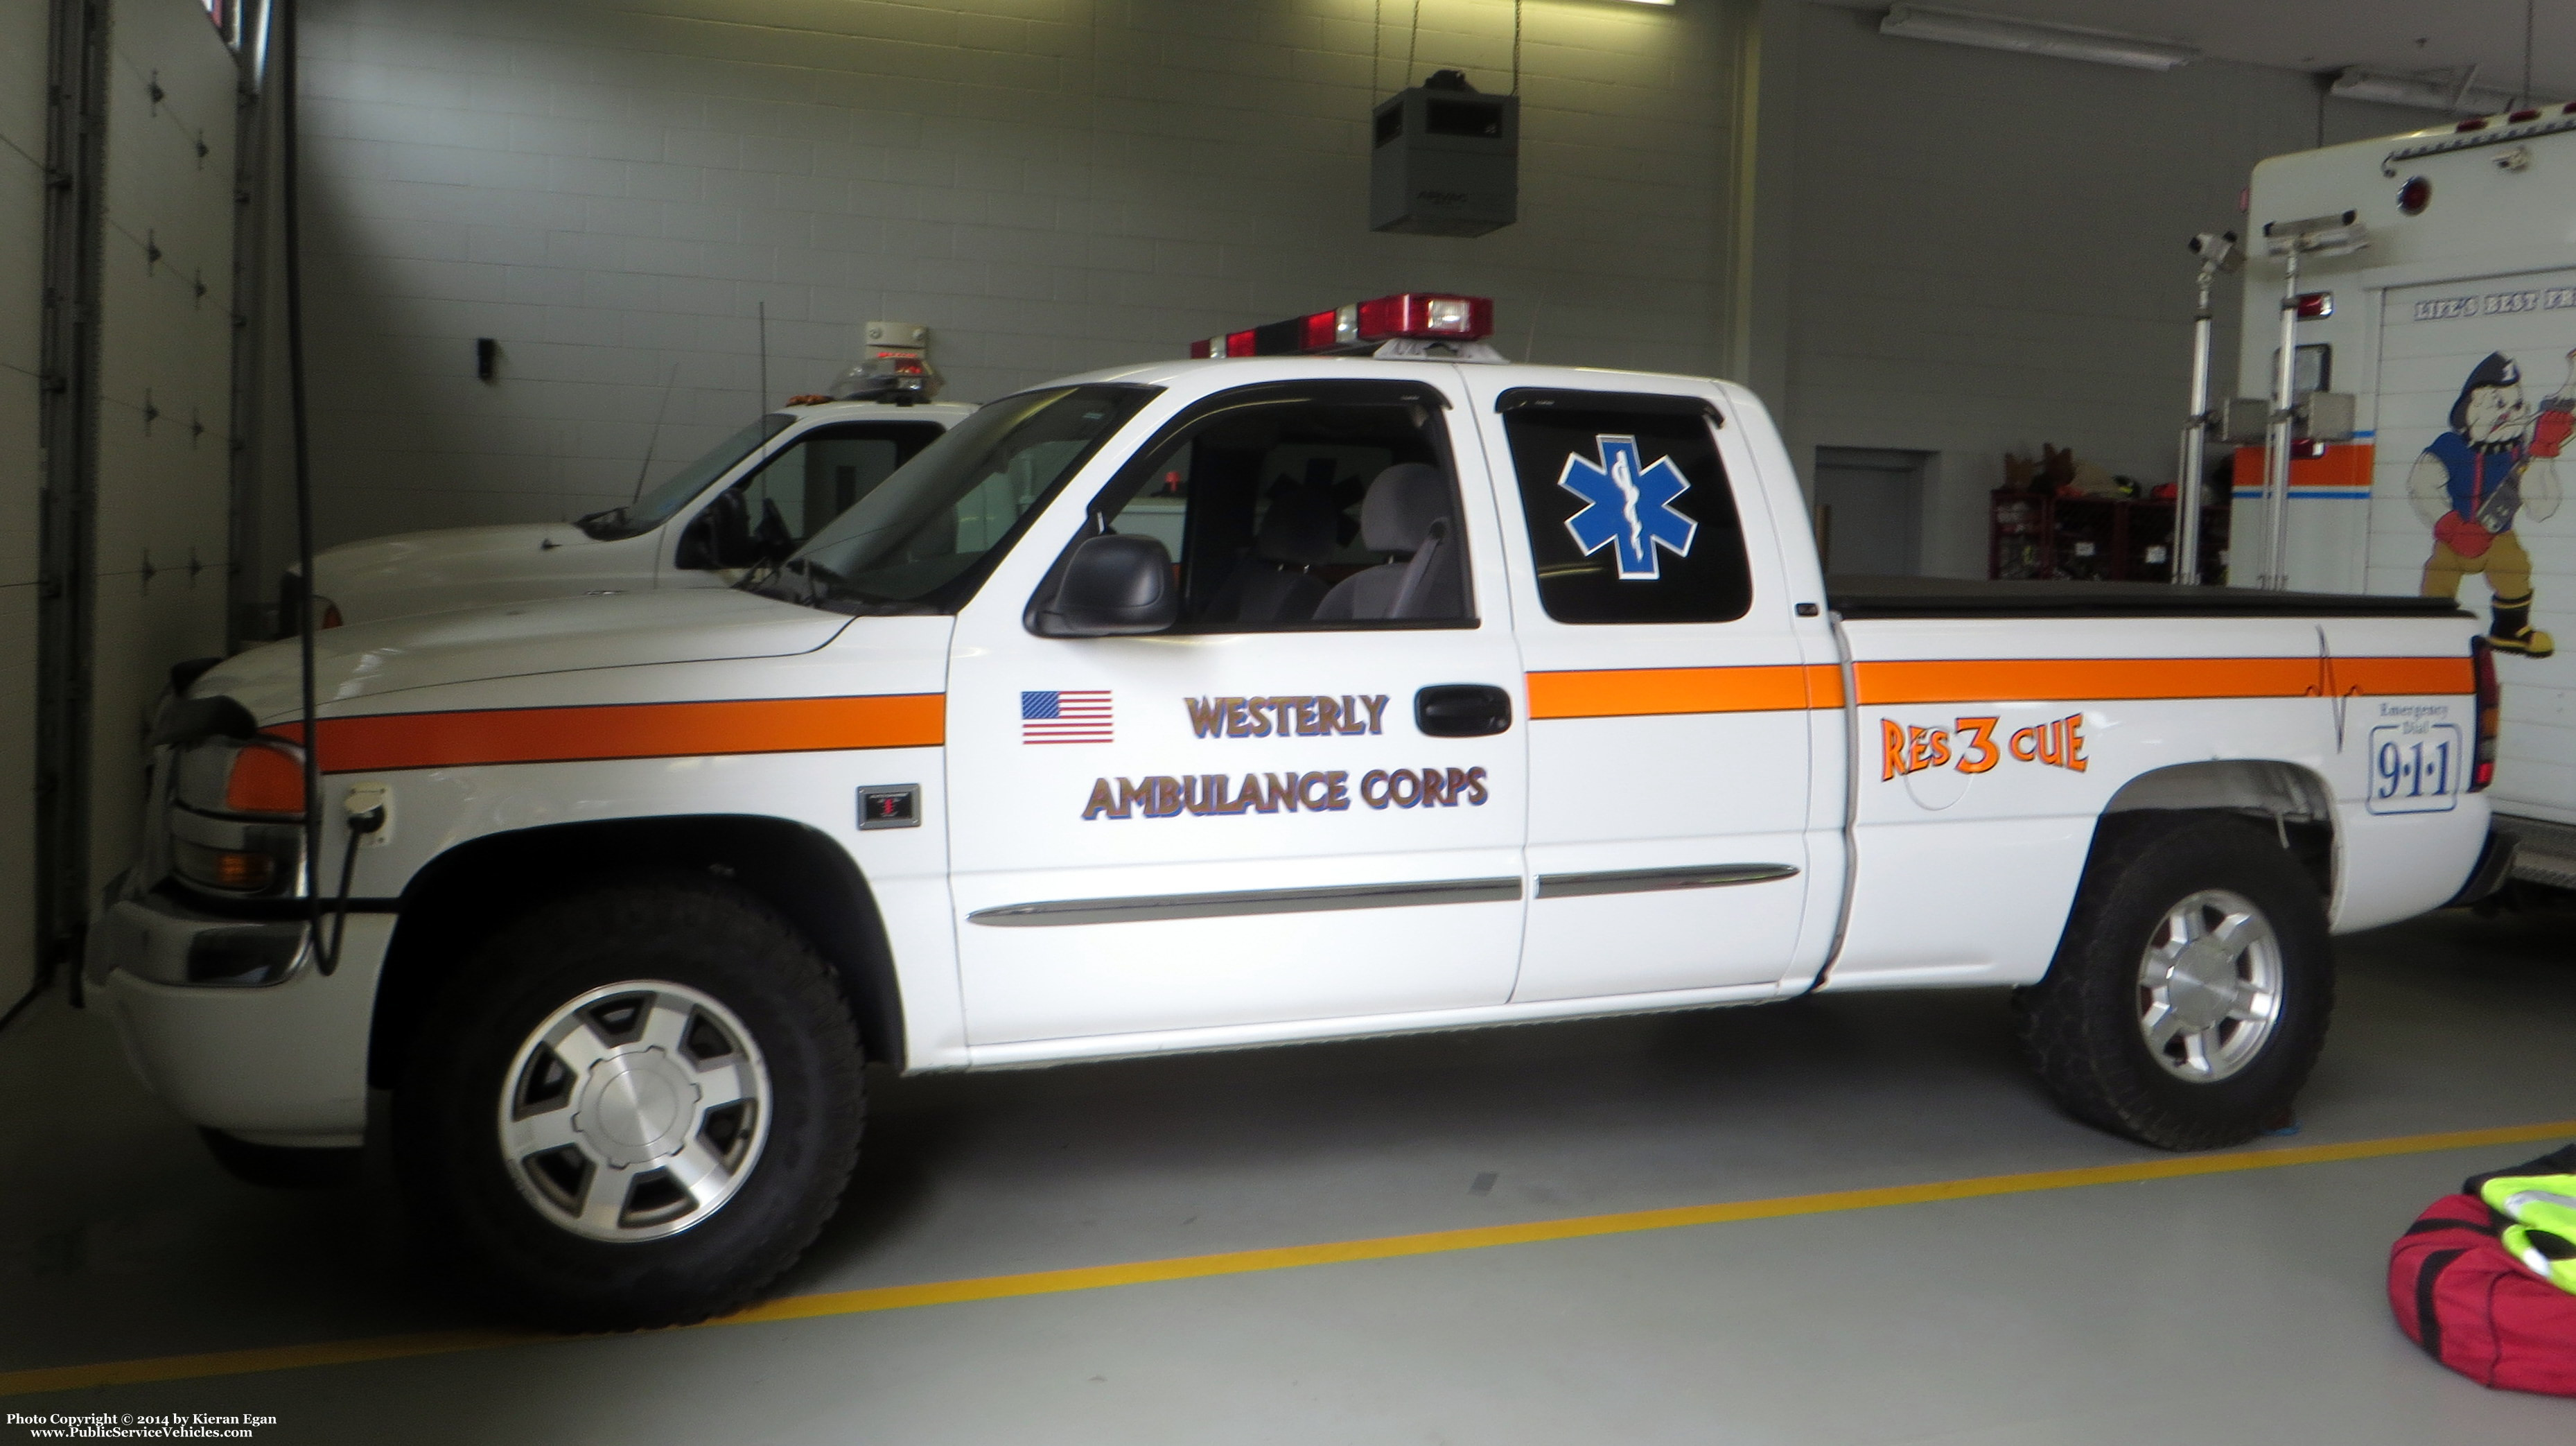 A photo  of Westerly Ambulance Corps
            Rescue 3, a 2005 GMC 1500 Extended Cab             taken by Kieran Egan